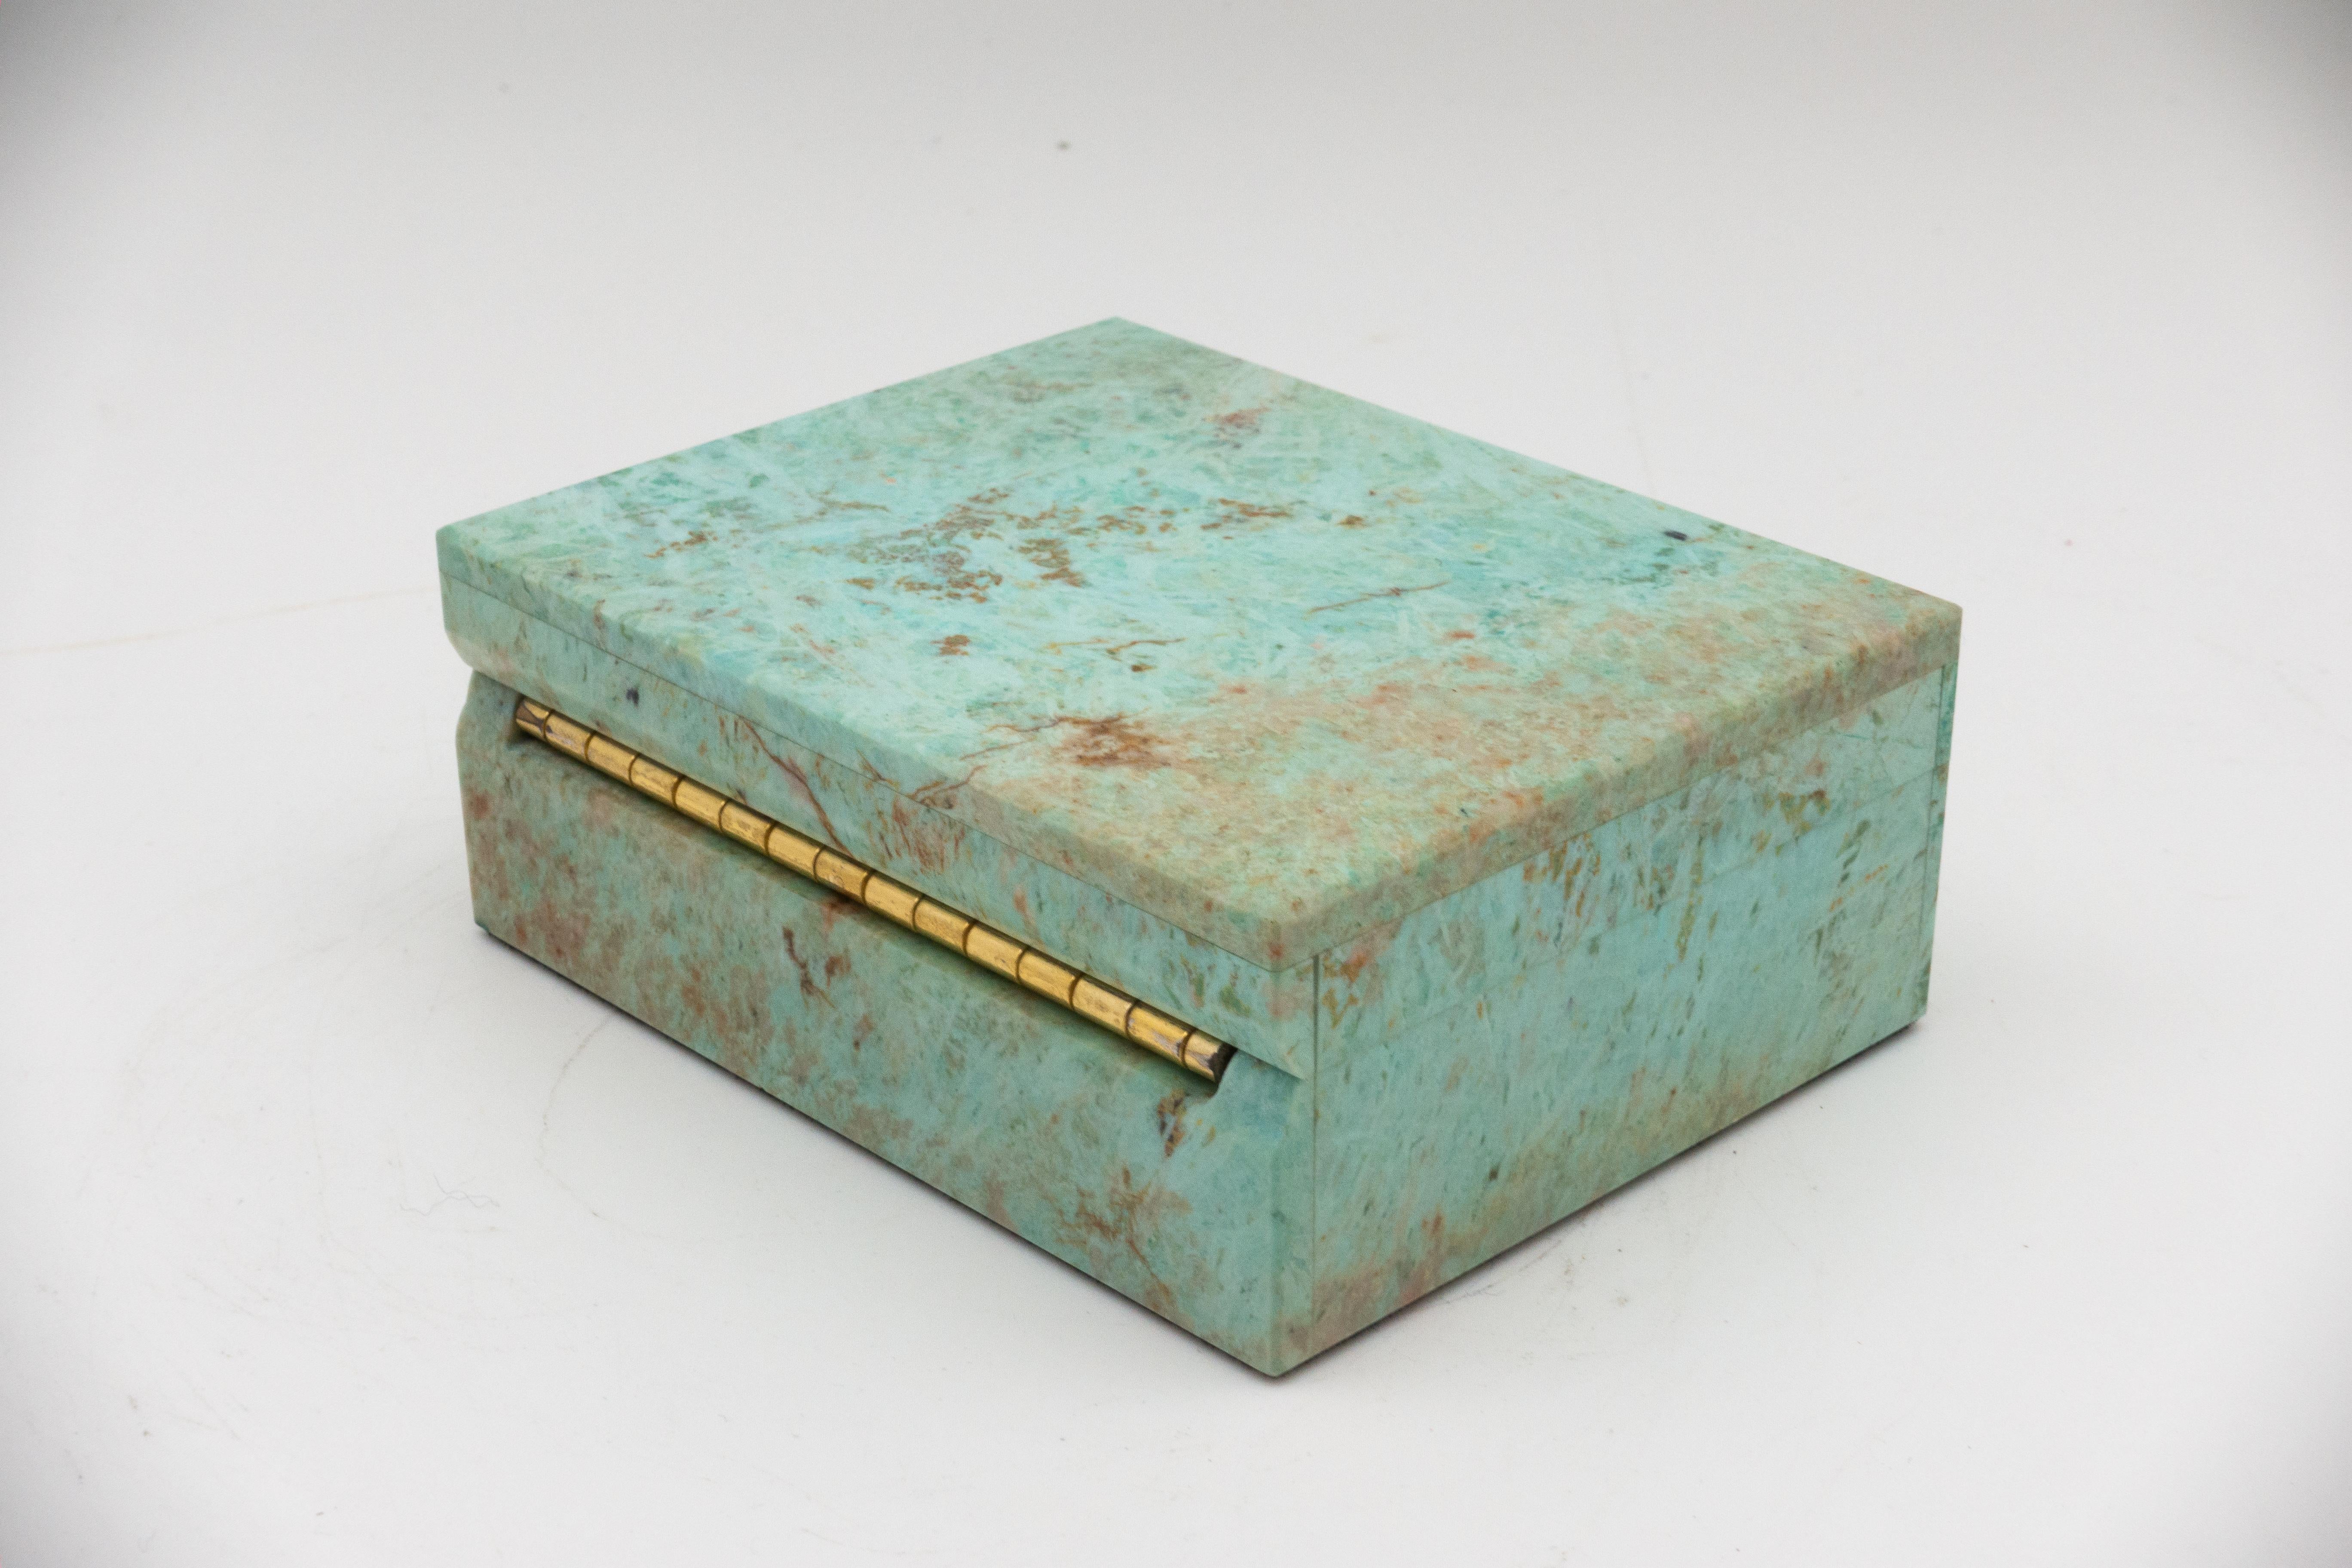 Chrysocolla and turquoise hinged box; minerals sourced from Peru then sent to India to produce this exquisite box.

Turquoise is an opaque, blue-to-green mineral that is a hydrated phosphate of copper and aluminum. It is rare and valuable in finer